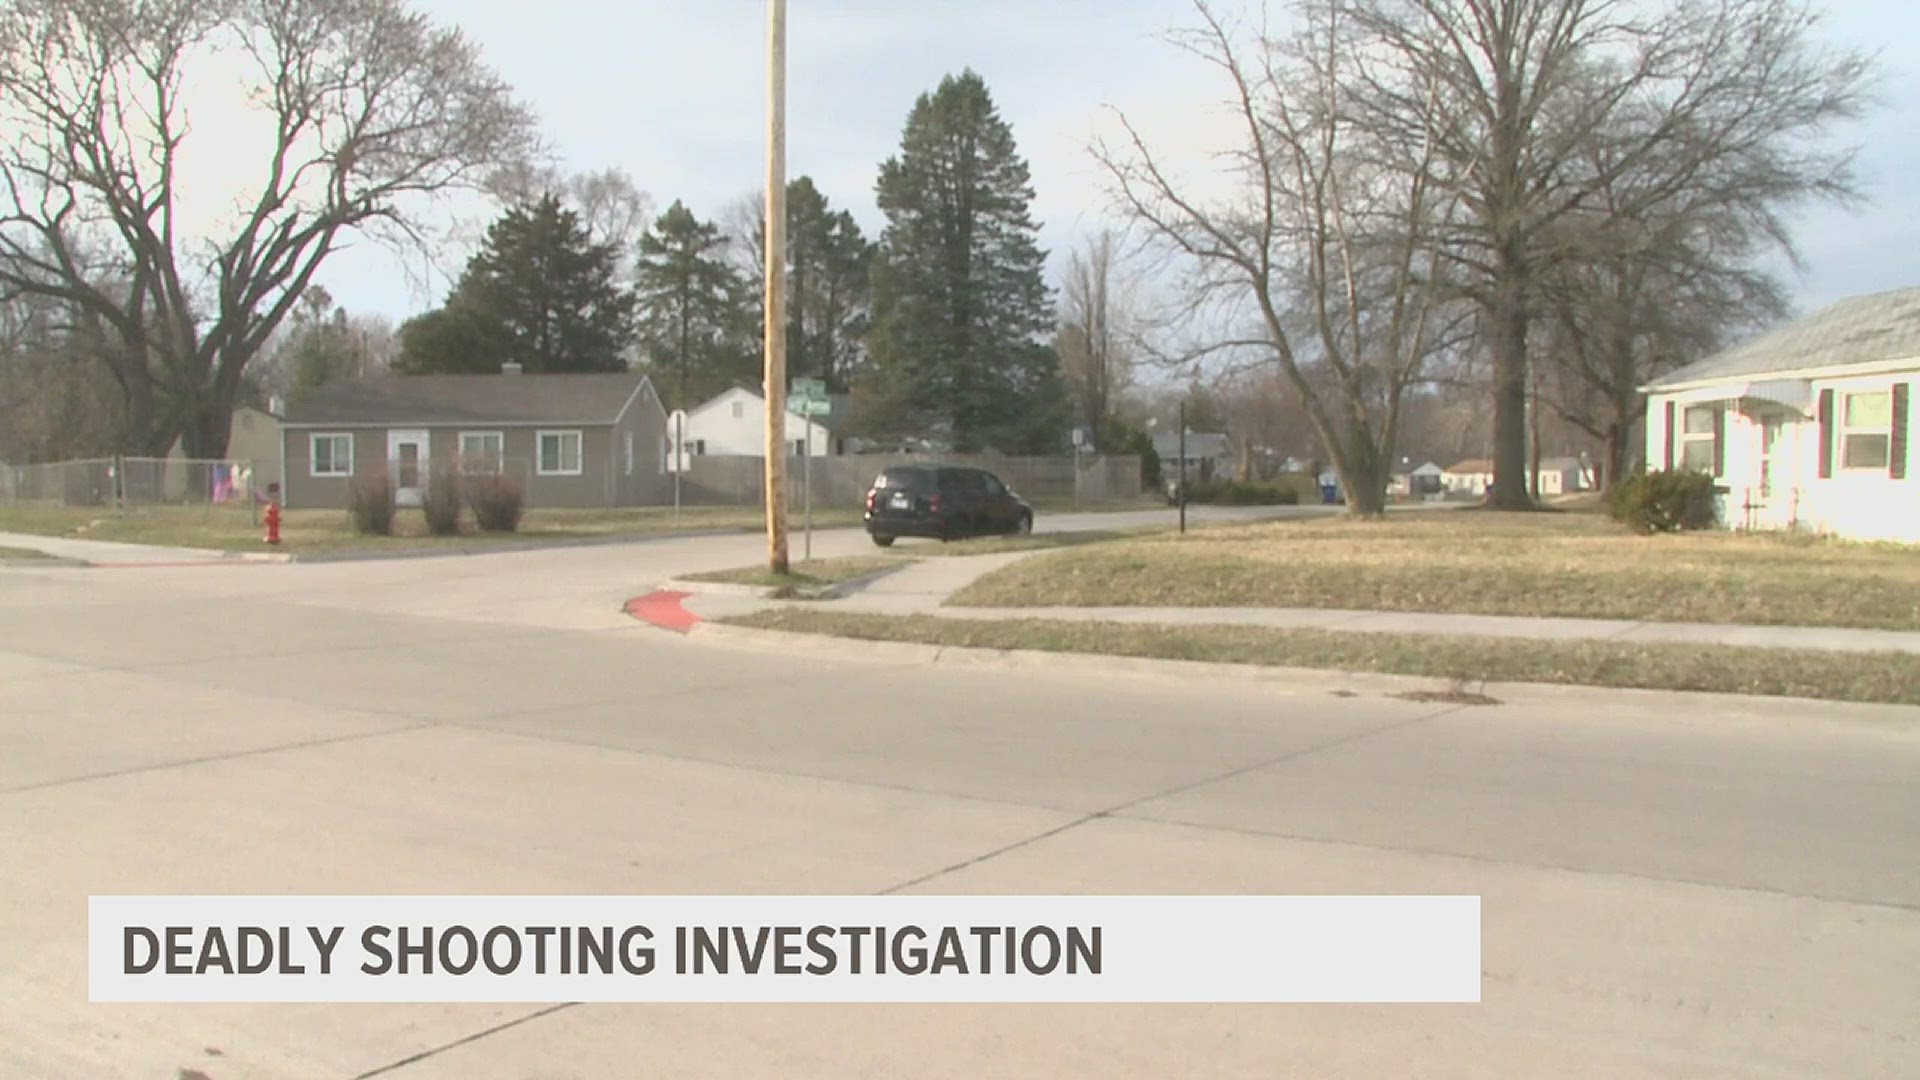 After hearing someone calling for help inside a home, police forced their way in and found a man's body and a woman who was shot in the leg.